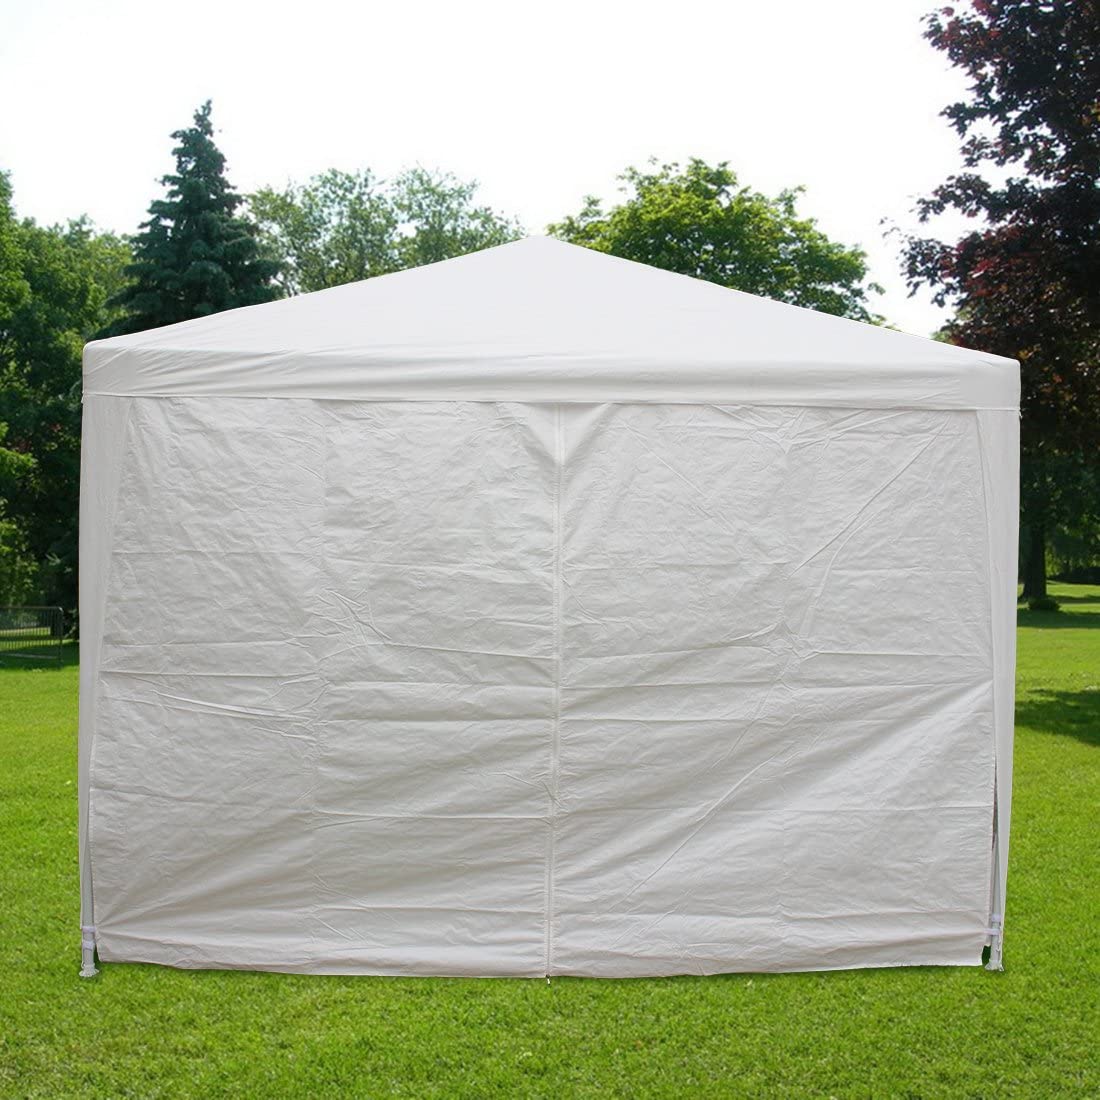 10' x 30' Party Tent sides